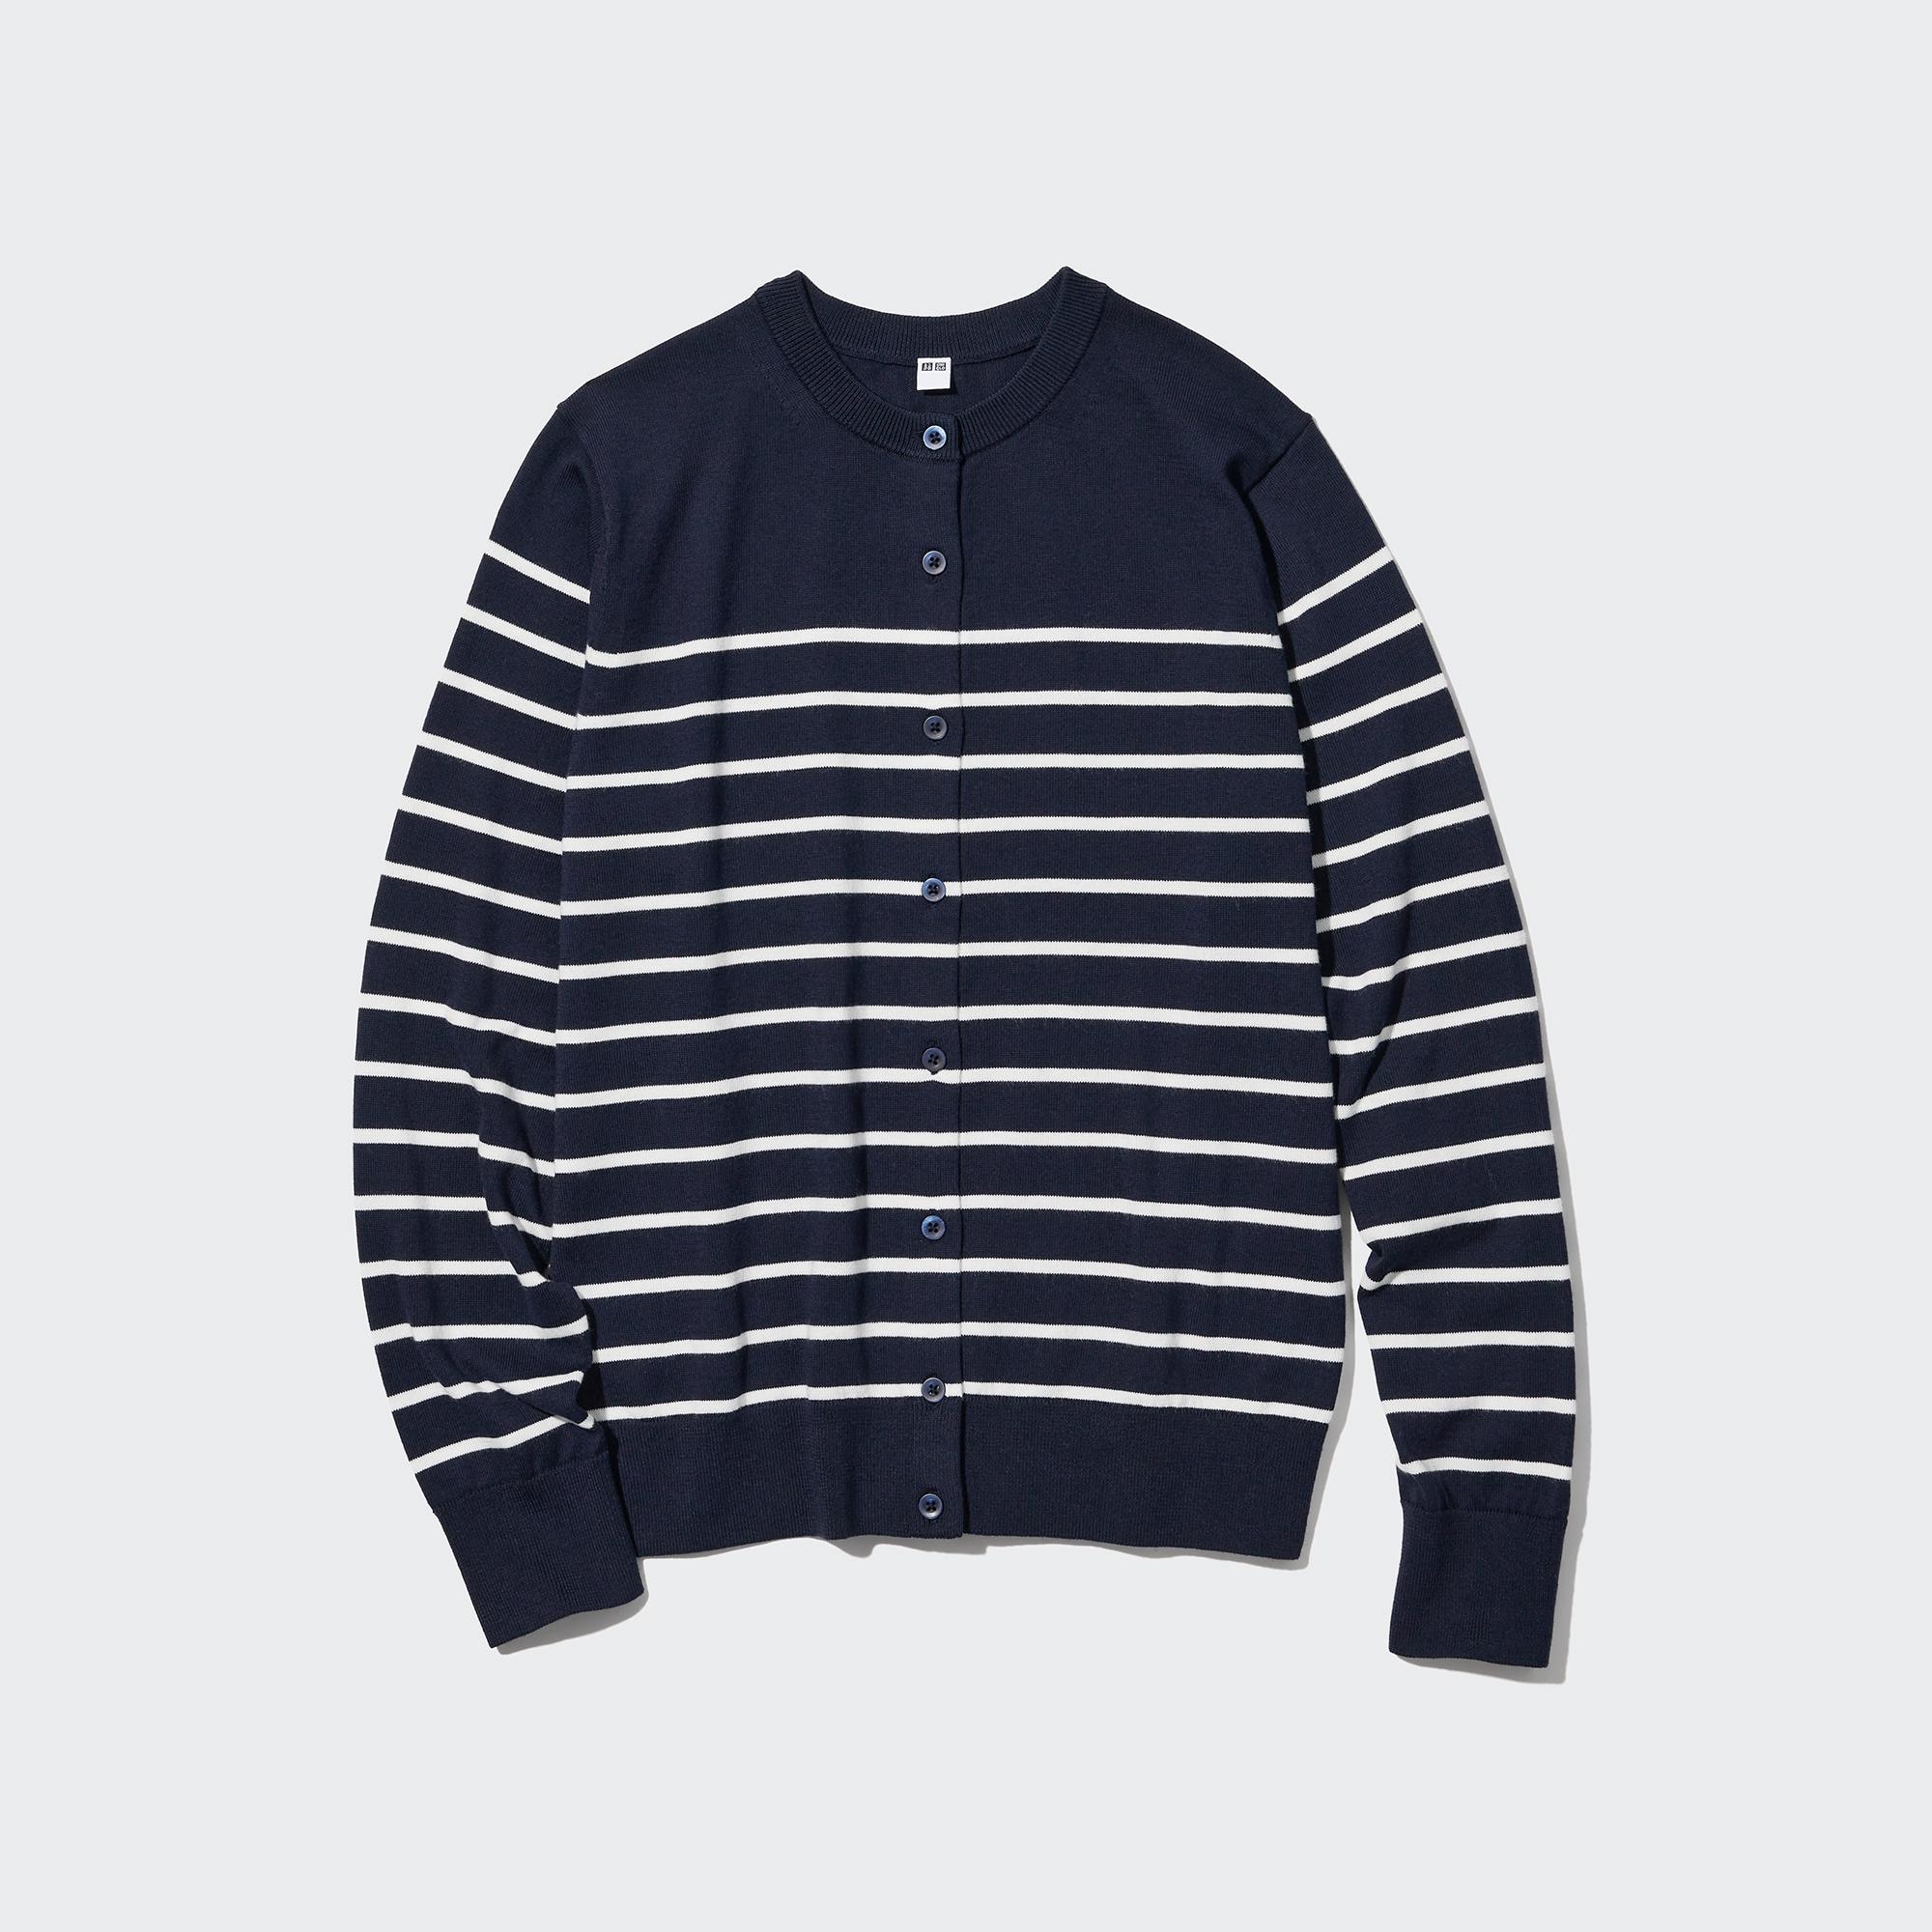 Check styling ideas for「UV Protection Striped Crew Neck Cardigan